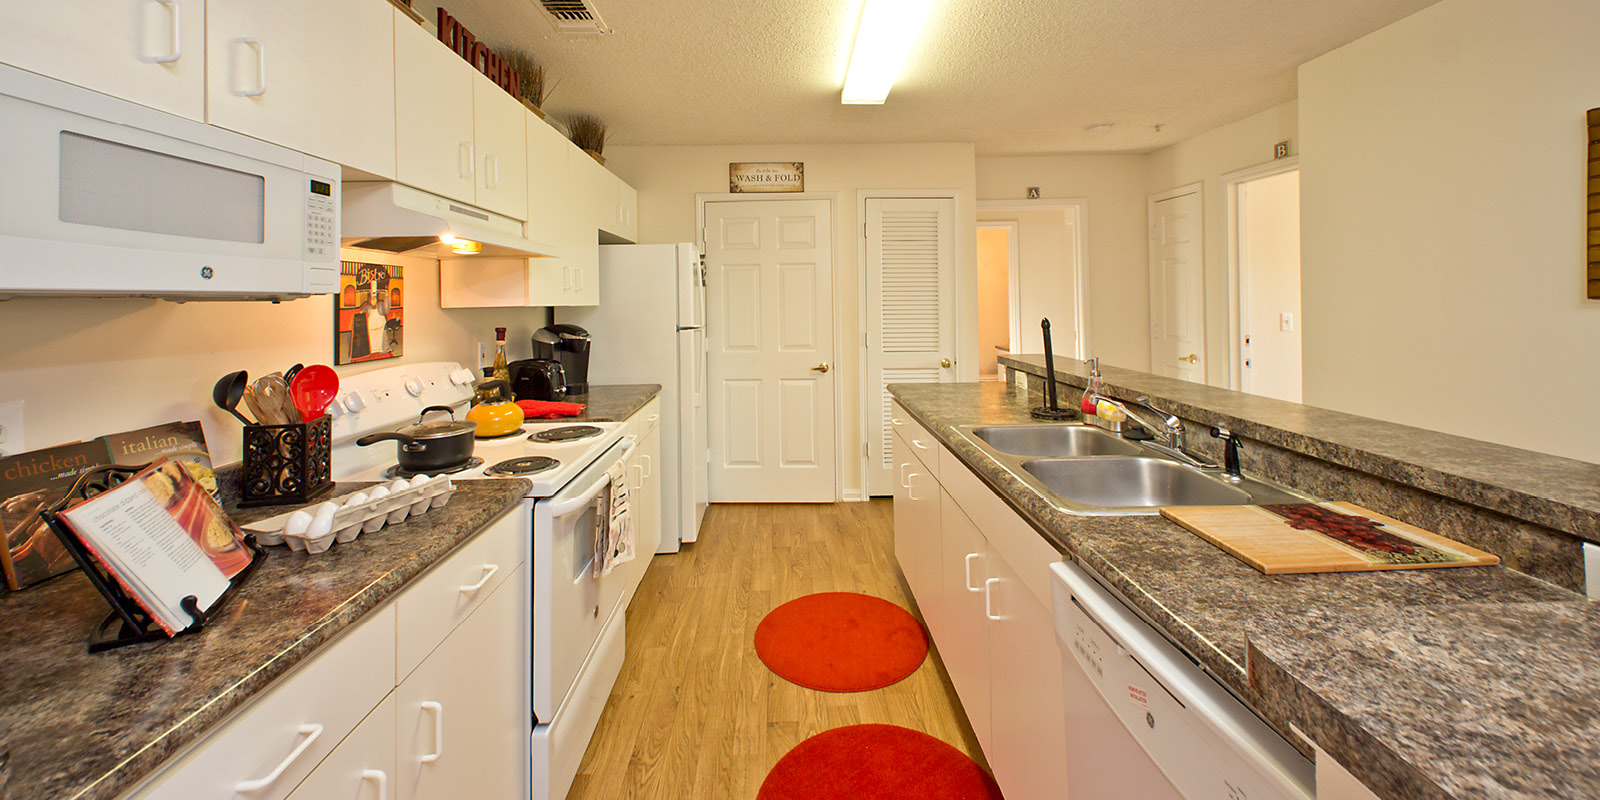 Galley-style kitchen with stove, microwave, dishwasher, fridge and plenty of countertop space